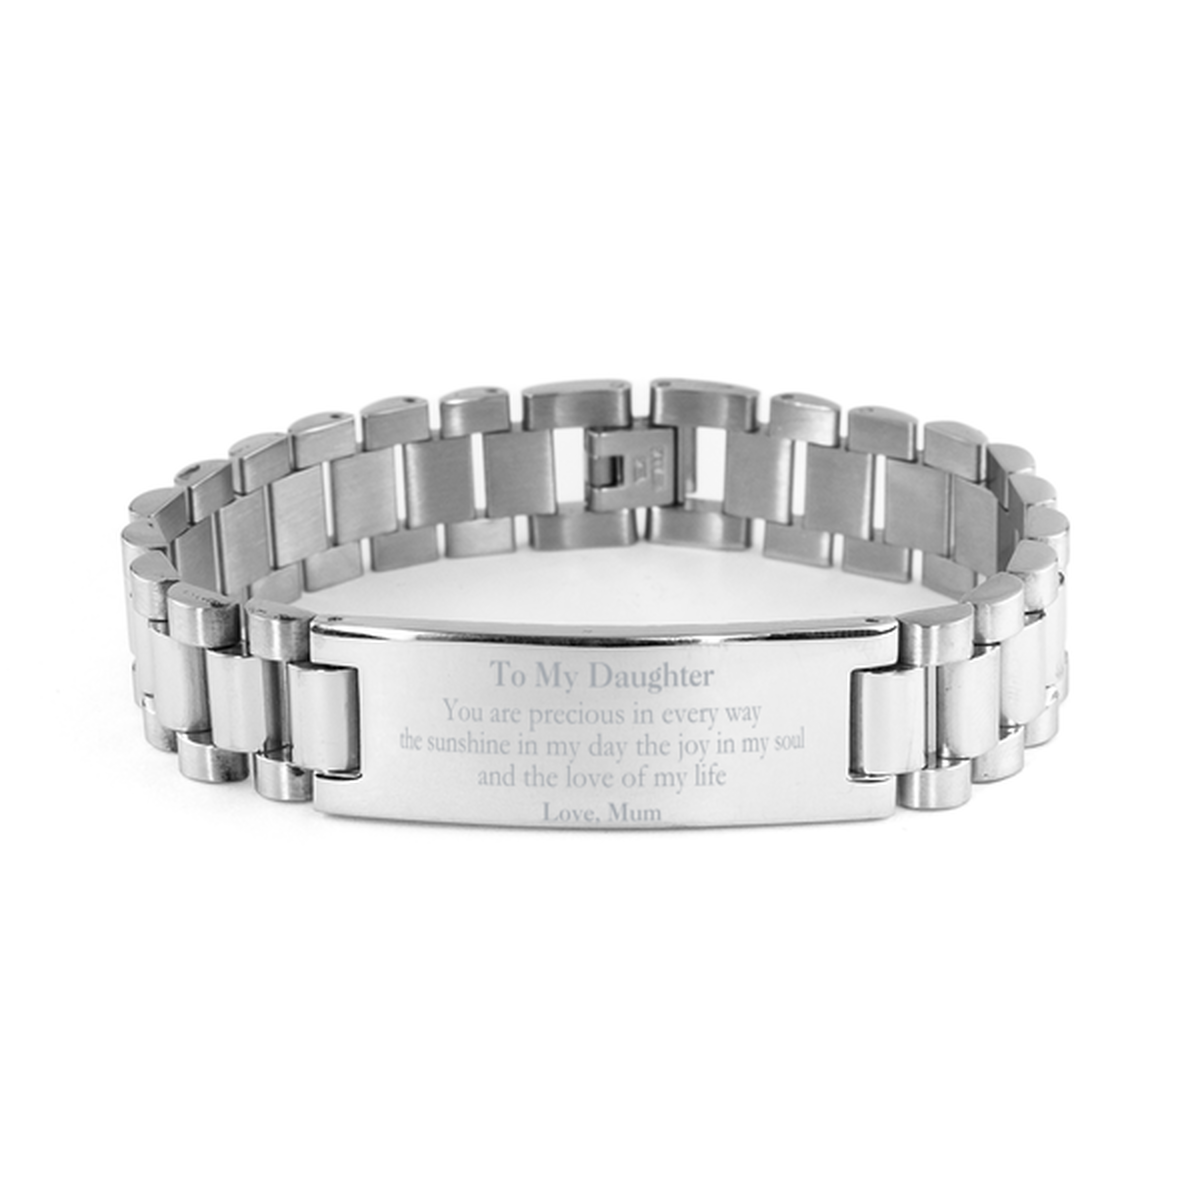 Graduation Gifts for Daughter Ladder Stainless Steel Bracelet Present from Mum, Christmas Daughter Birthday Gifts Daughter You are precious in every way the sunshine in my day. Love, Mum